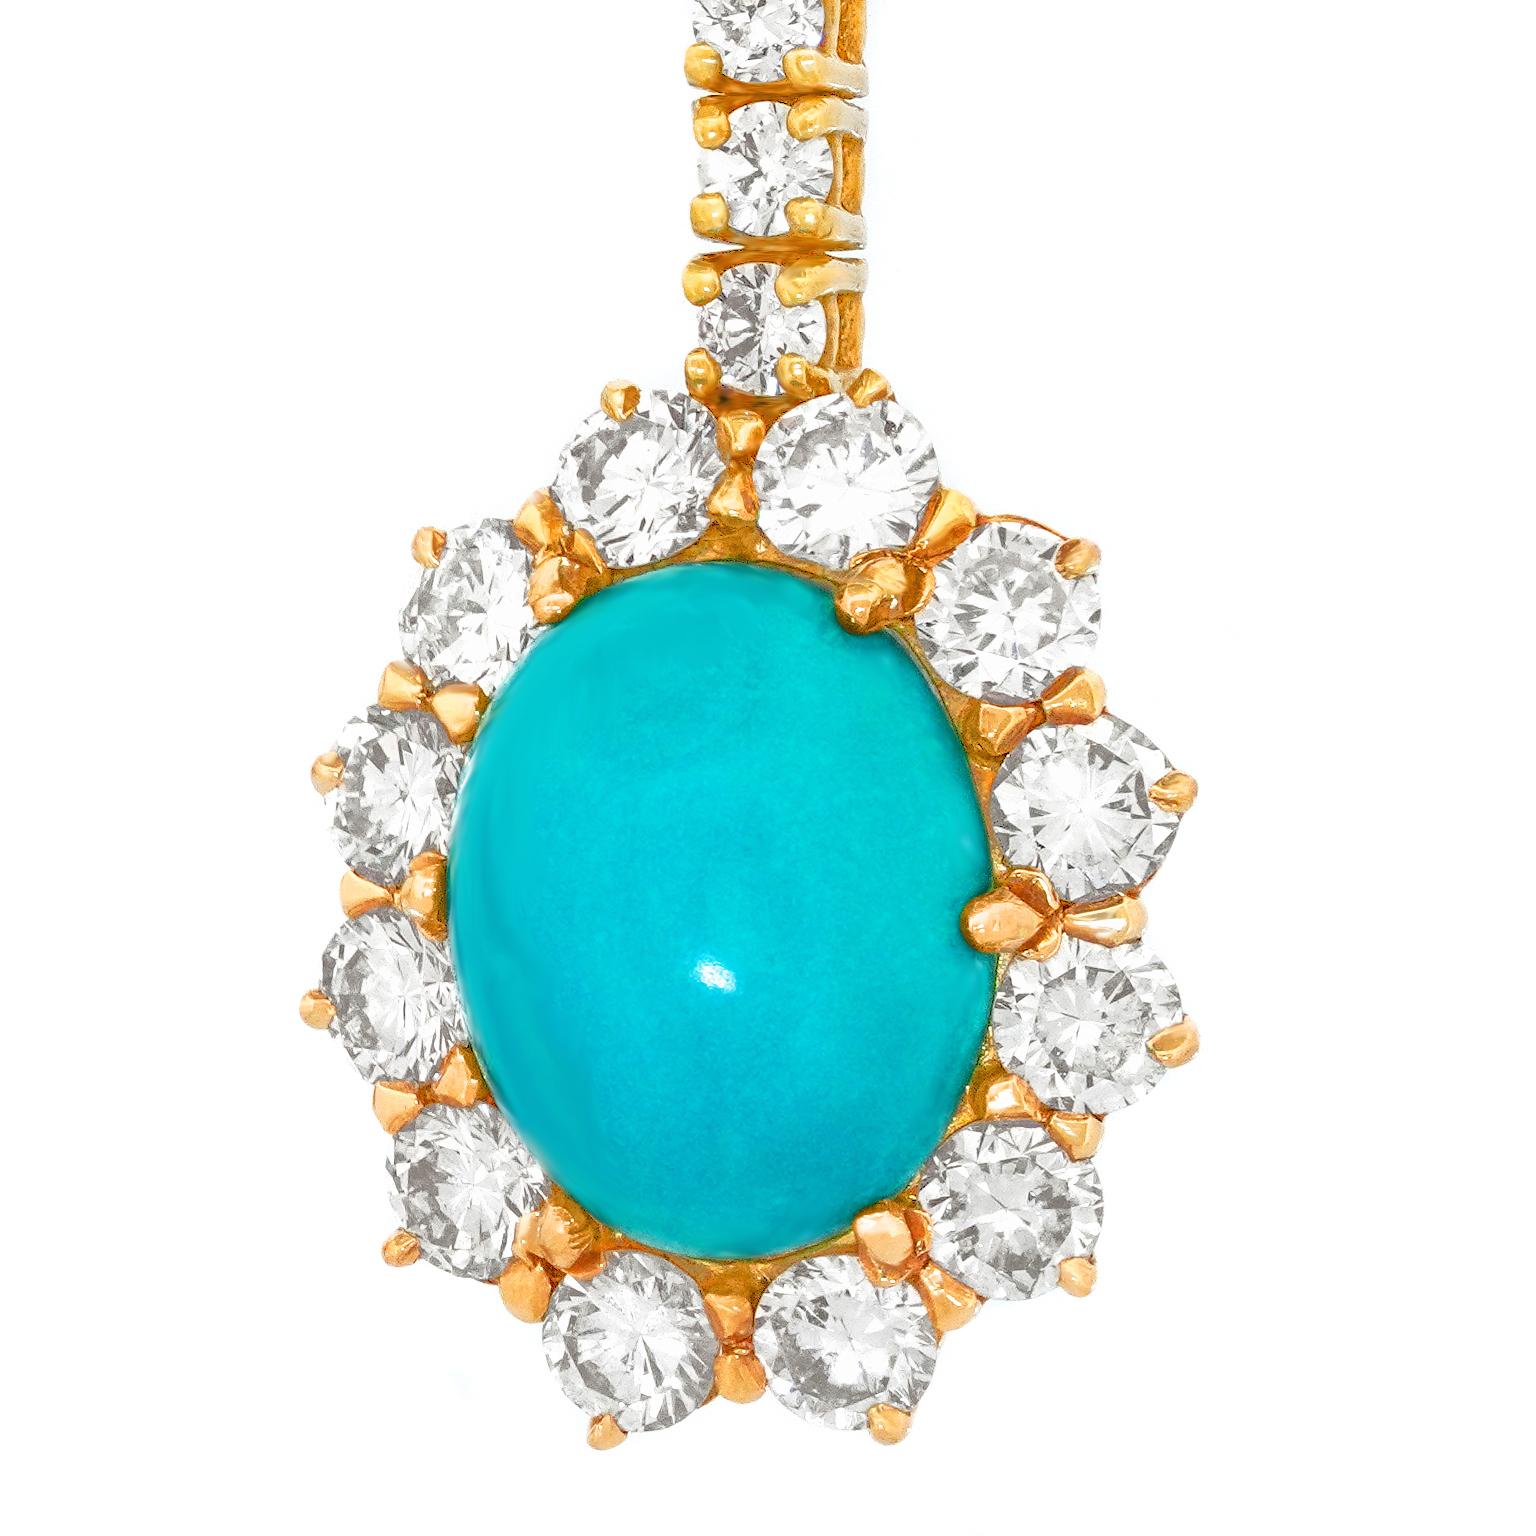 Brilliant Cut Sixties Persian Turquoise and Diamond Chandelier Earrings For Sale